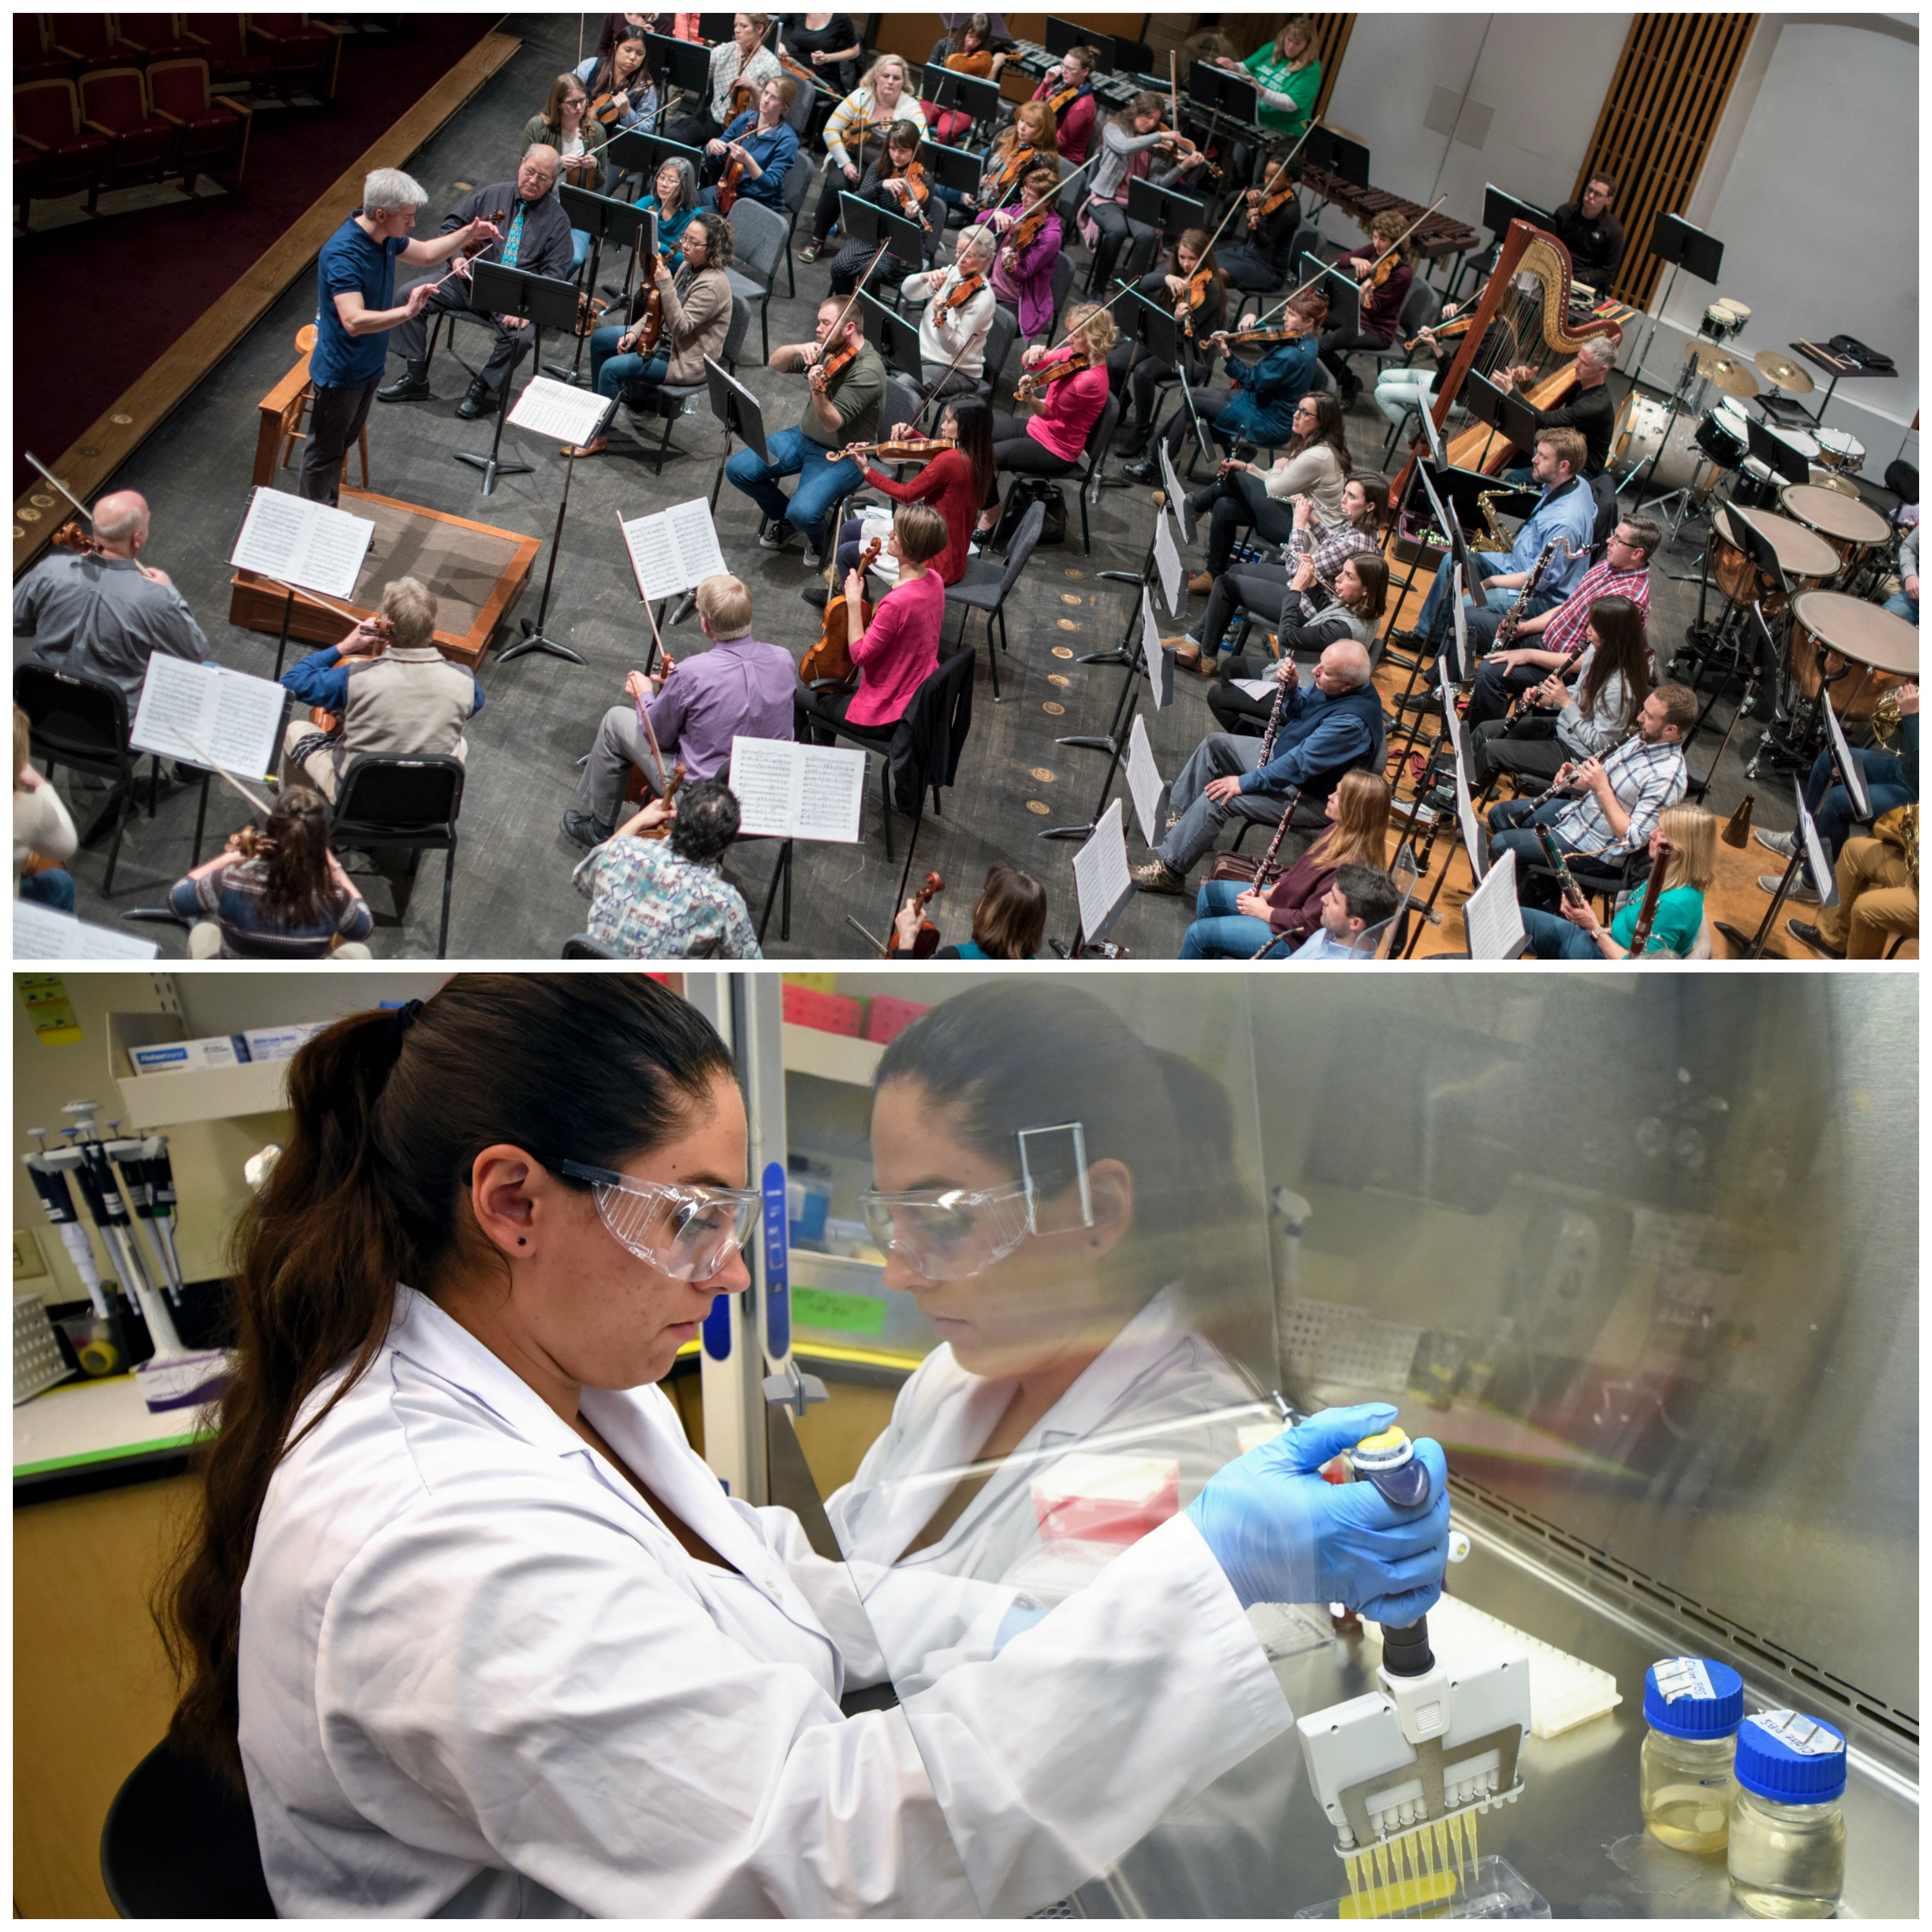 Image 1: an overhead shot of an orchestra practicing. Image 2: a female scientist with long dark hair wearing protective goggles and white scrubs holds a jar inside a laboratory. 